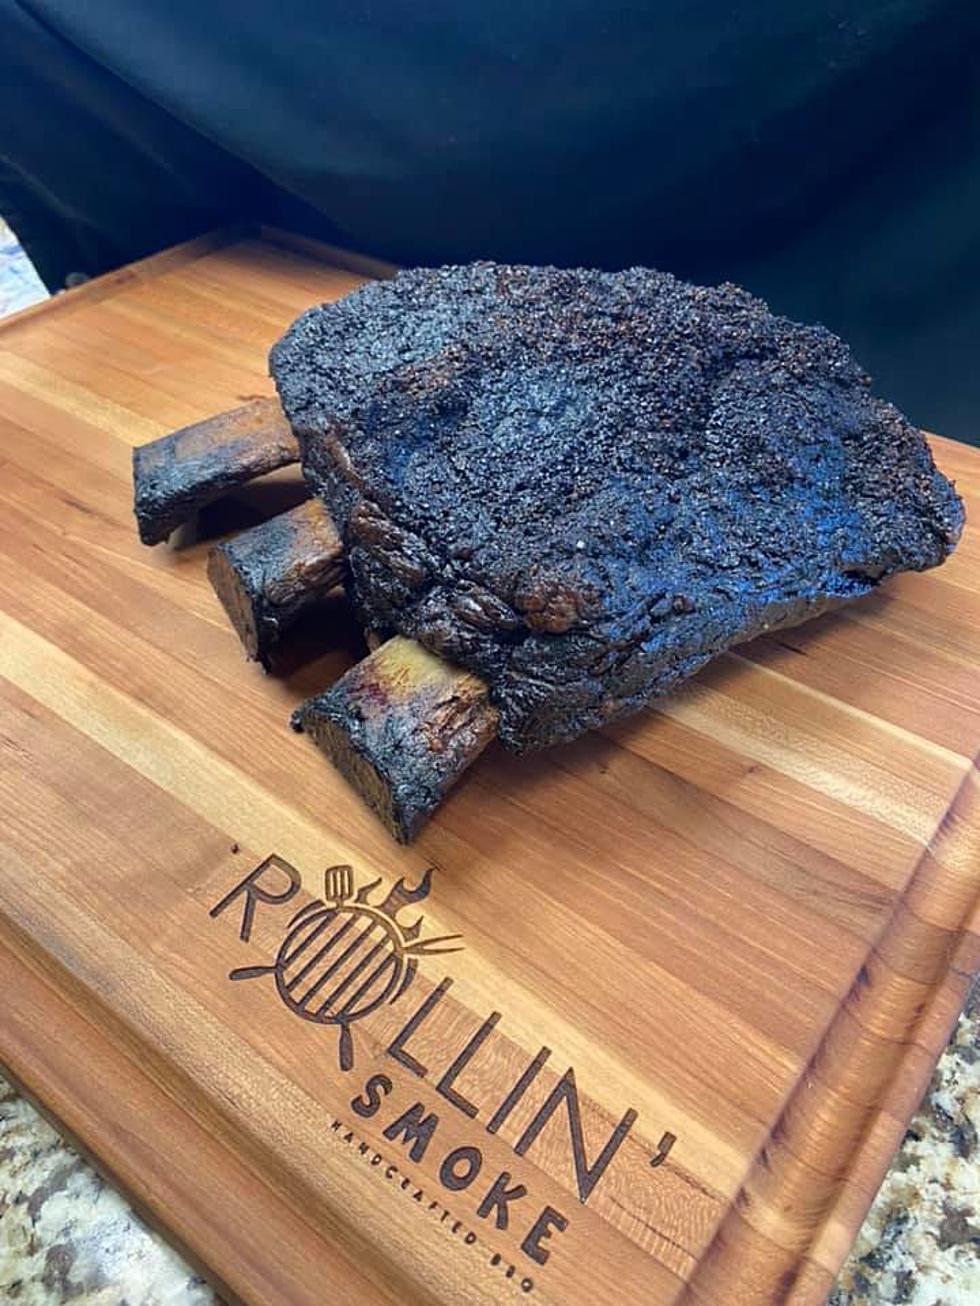 518 Debate: What Color is the Crust on These Beef Ribs?